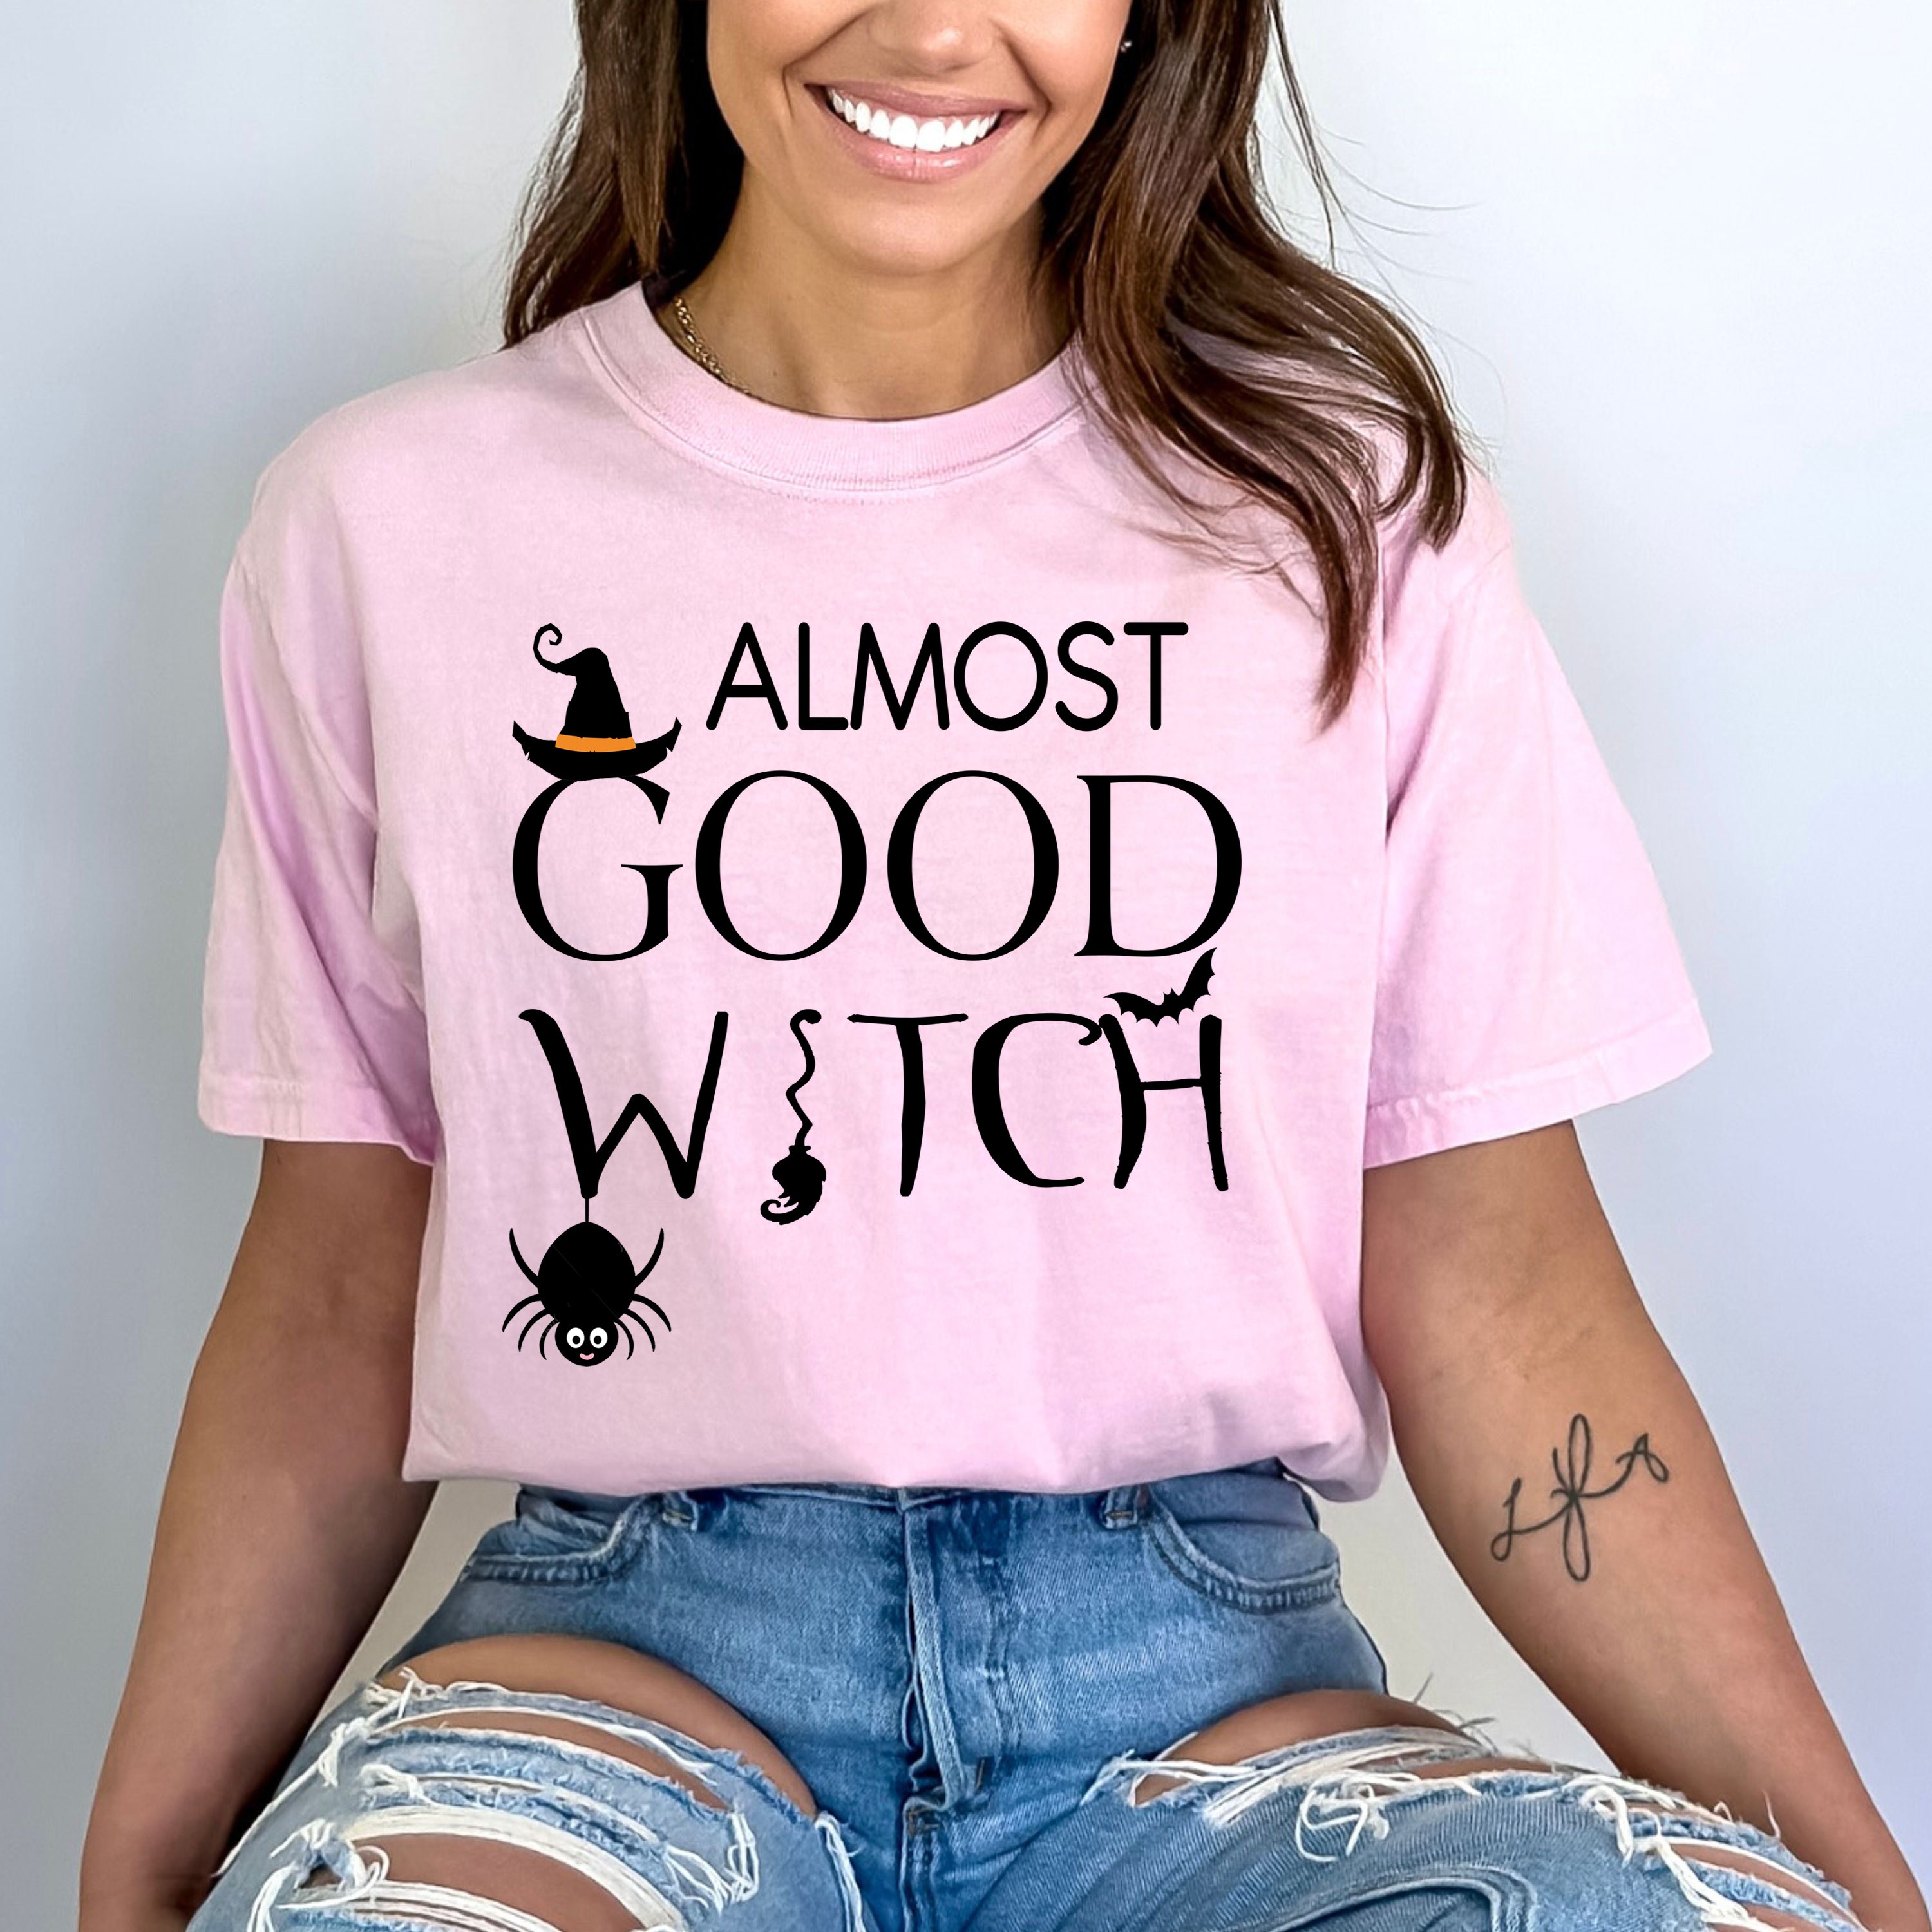 Almost Good Witch - Bella Canvas